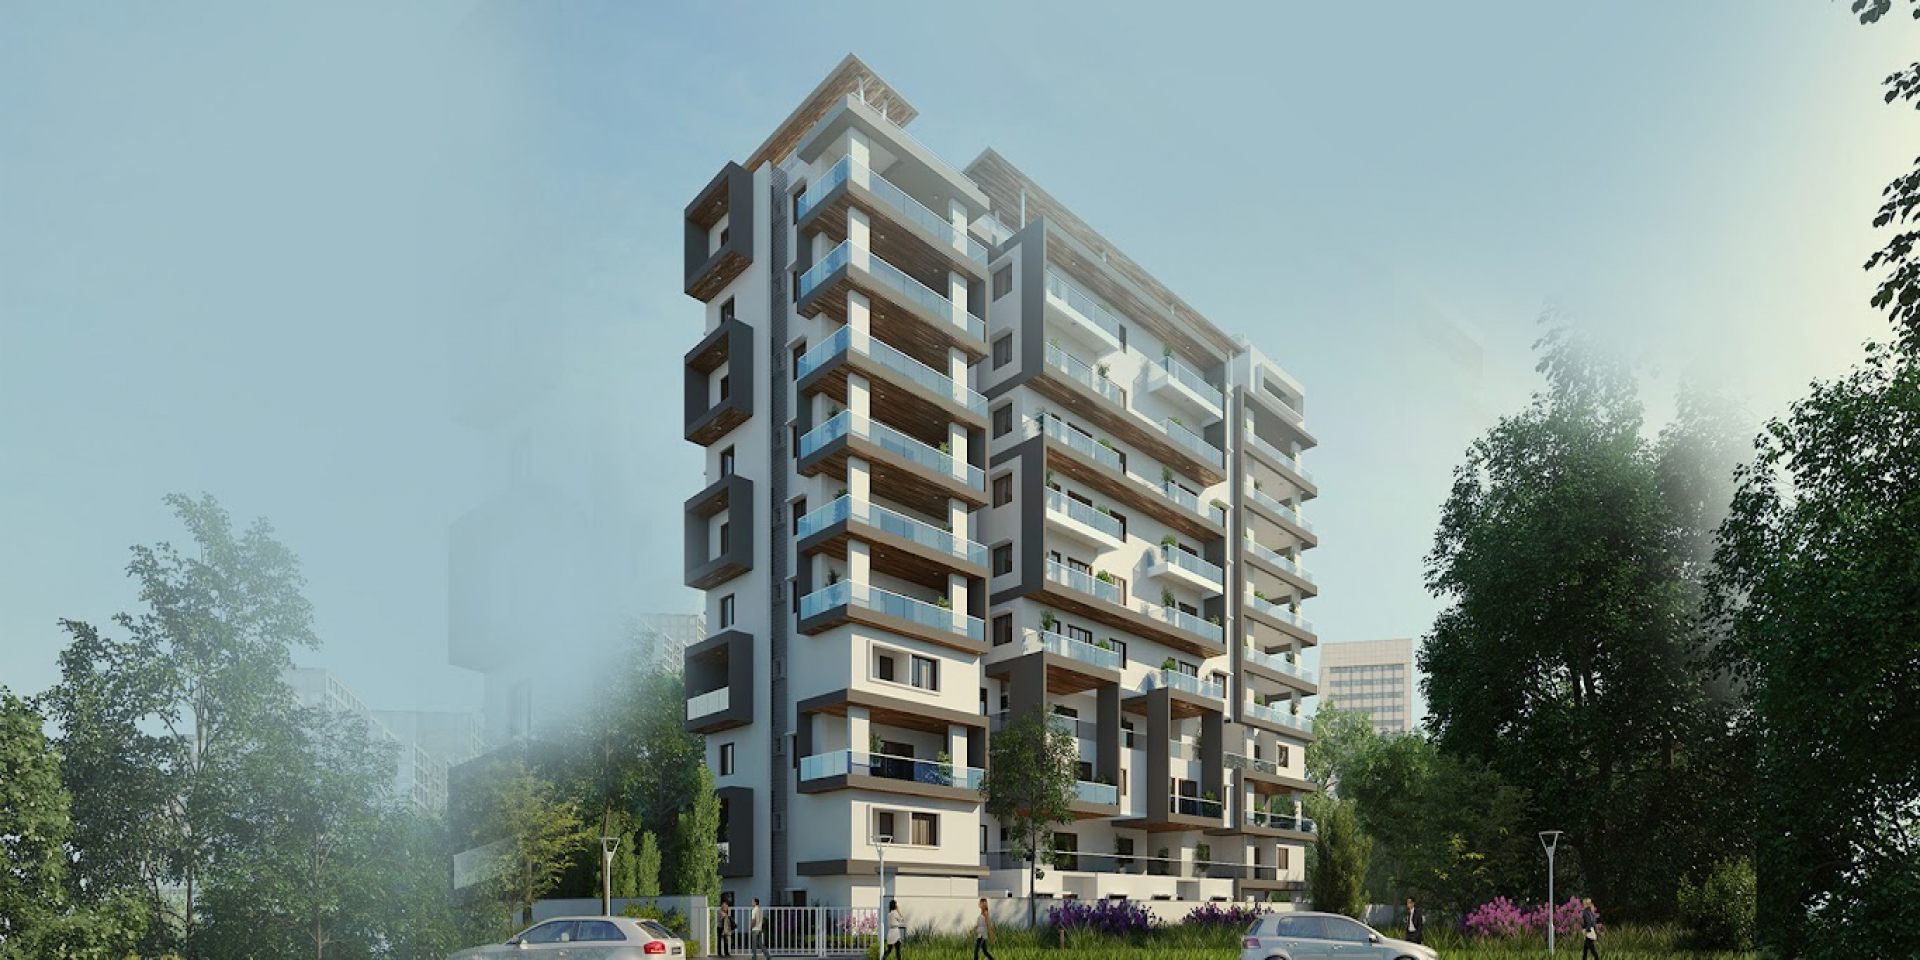 2, 3 BHK Apartment for sale in Hennur Road